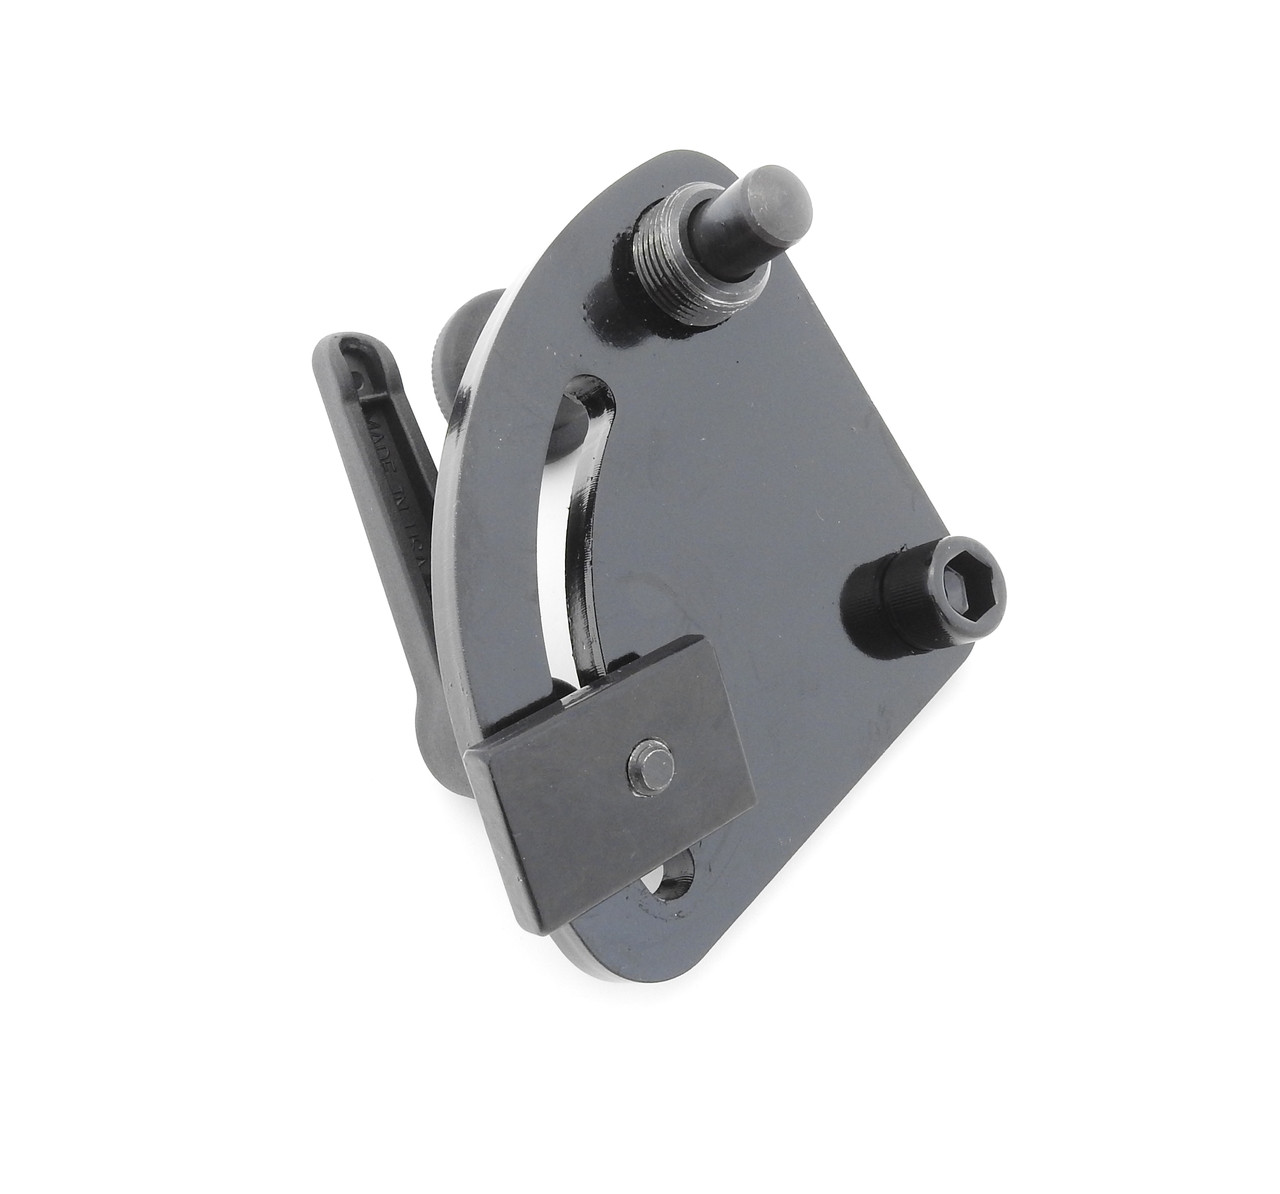 Clamping Unit, Variable Adjustmemt - Quick Release